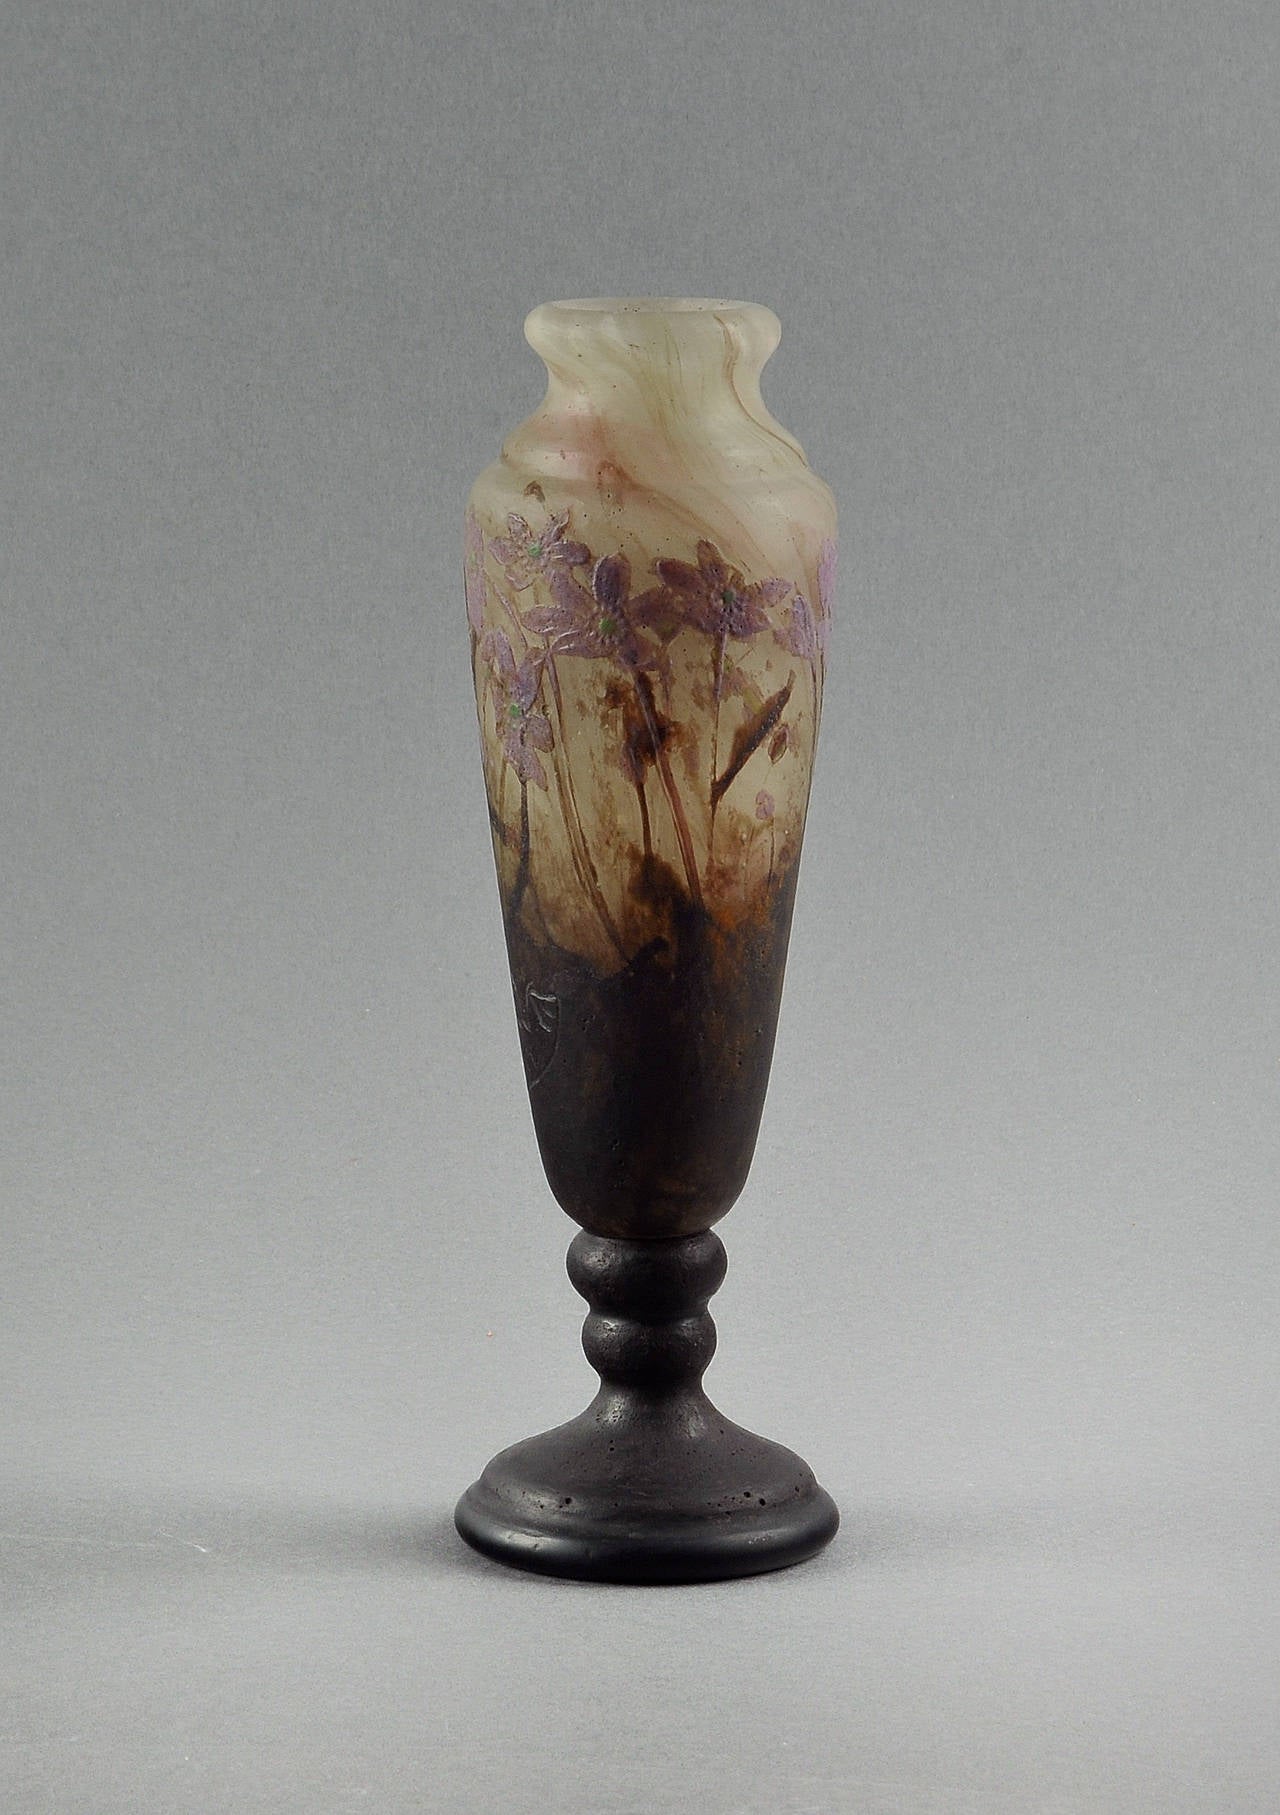 Very rare Daum cameo glass vase acid-etched and internally decorated with liverwort.
Signed 